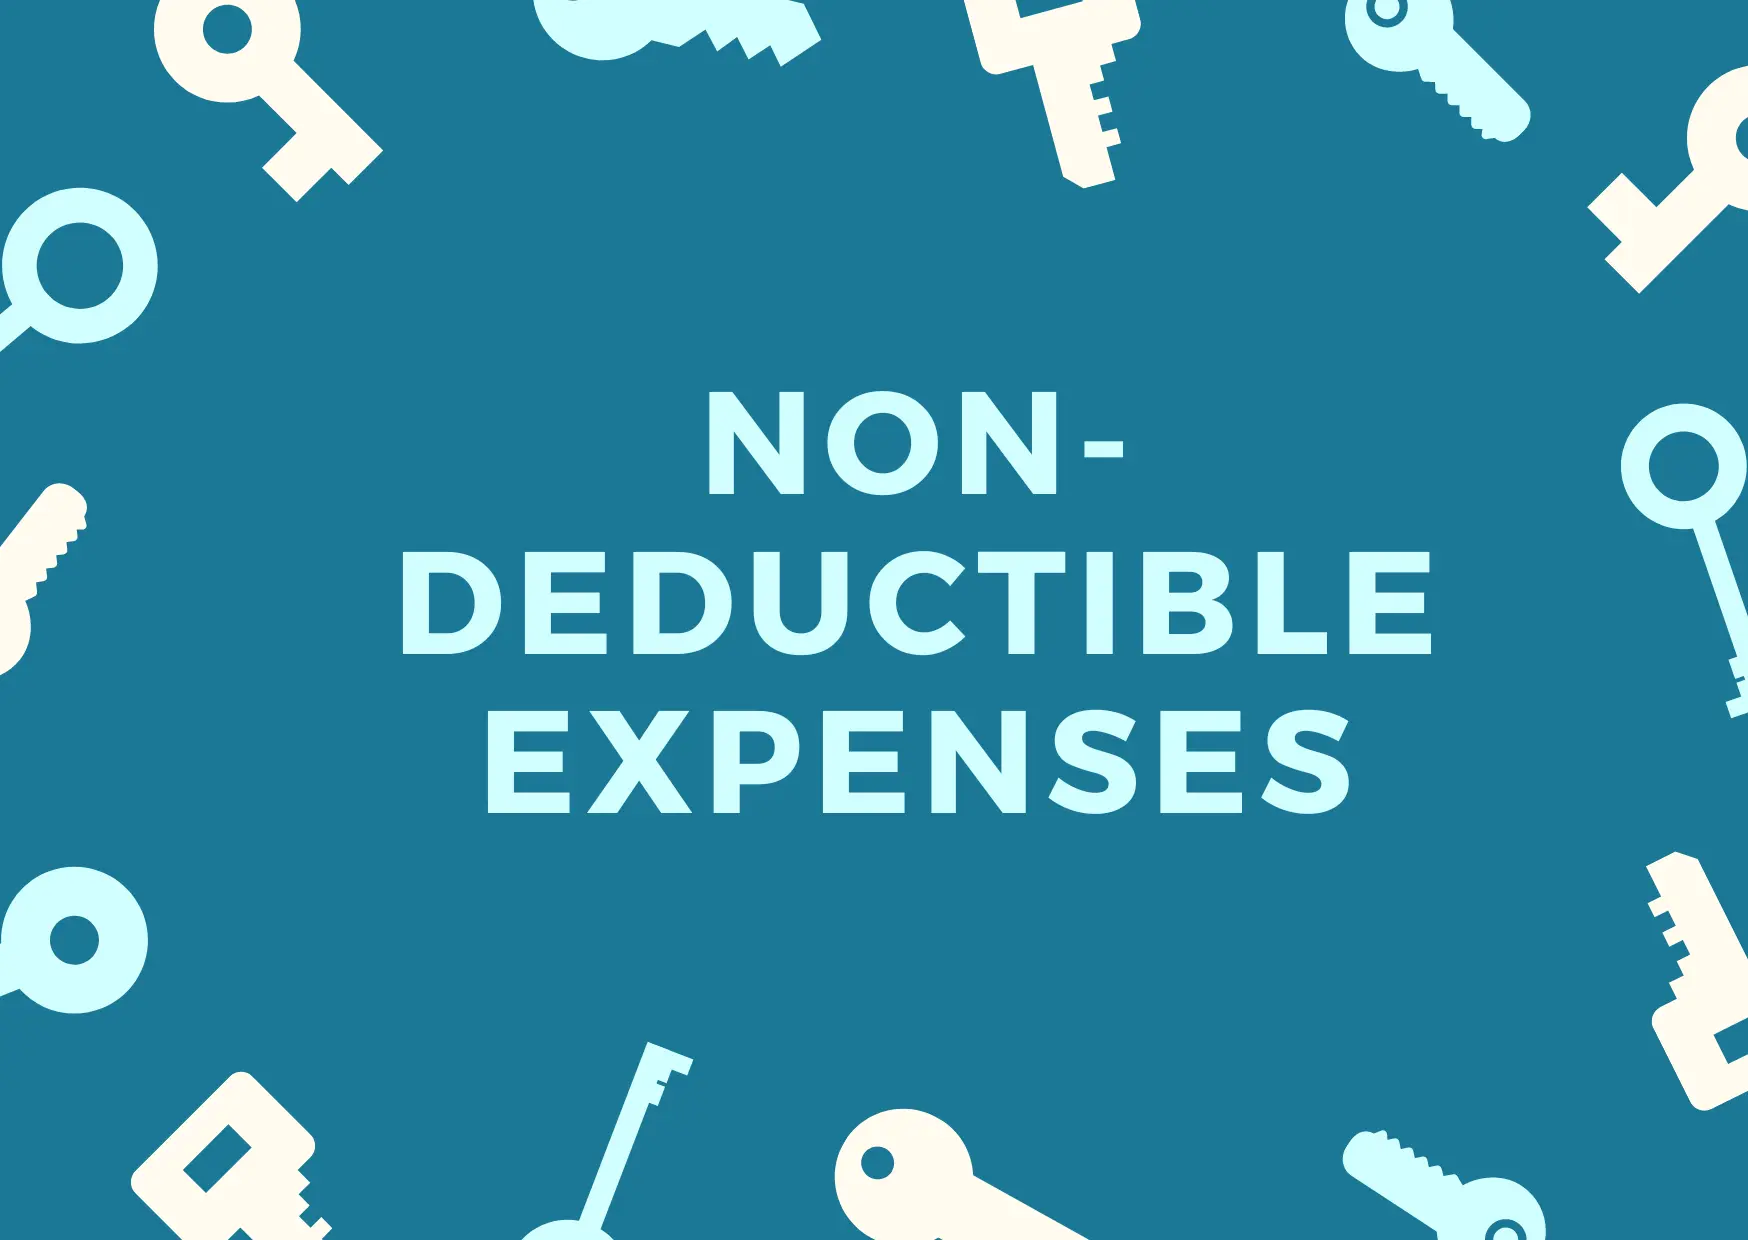 Image With Text Non-Deductible Moving Expenses